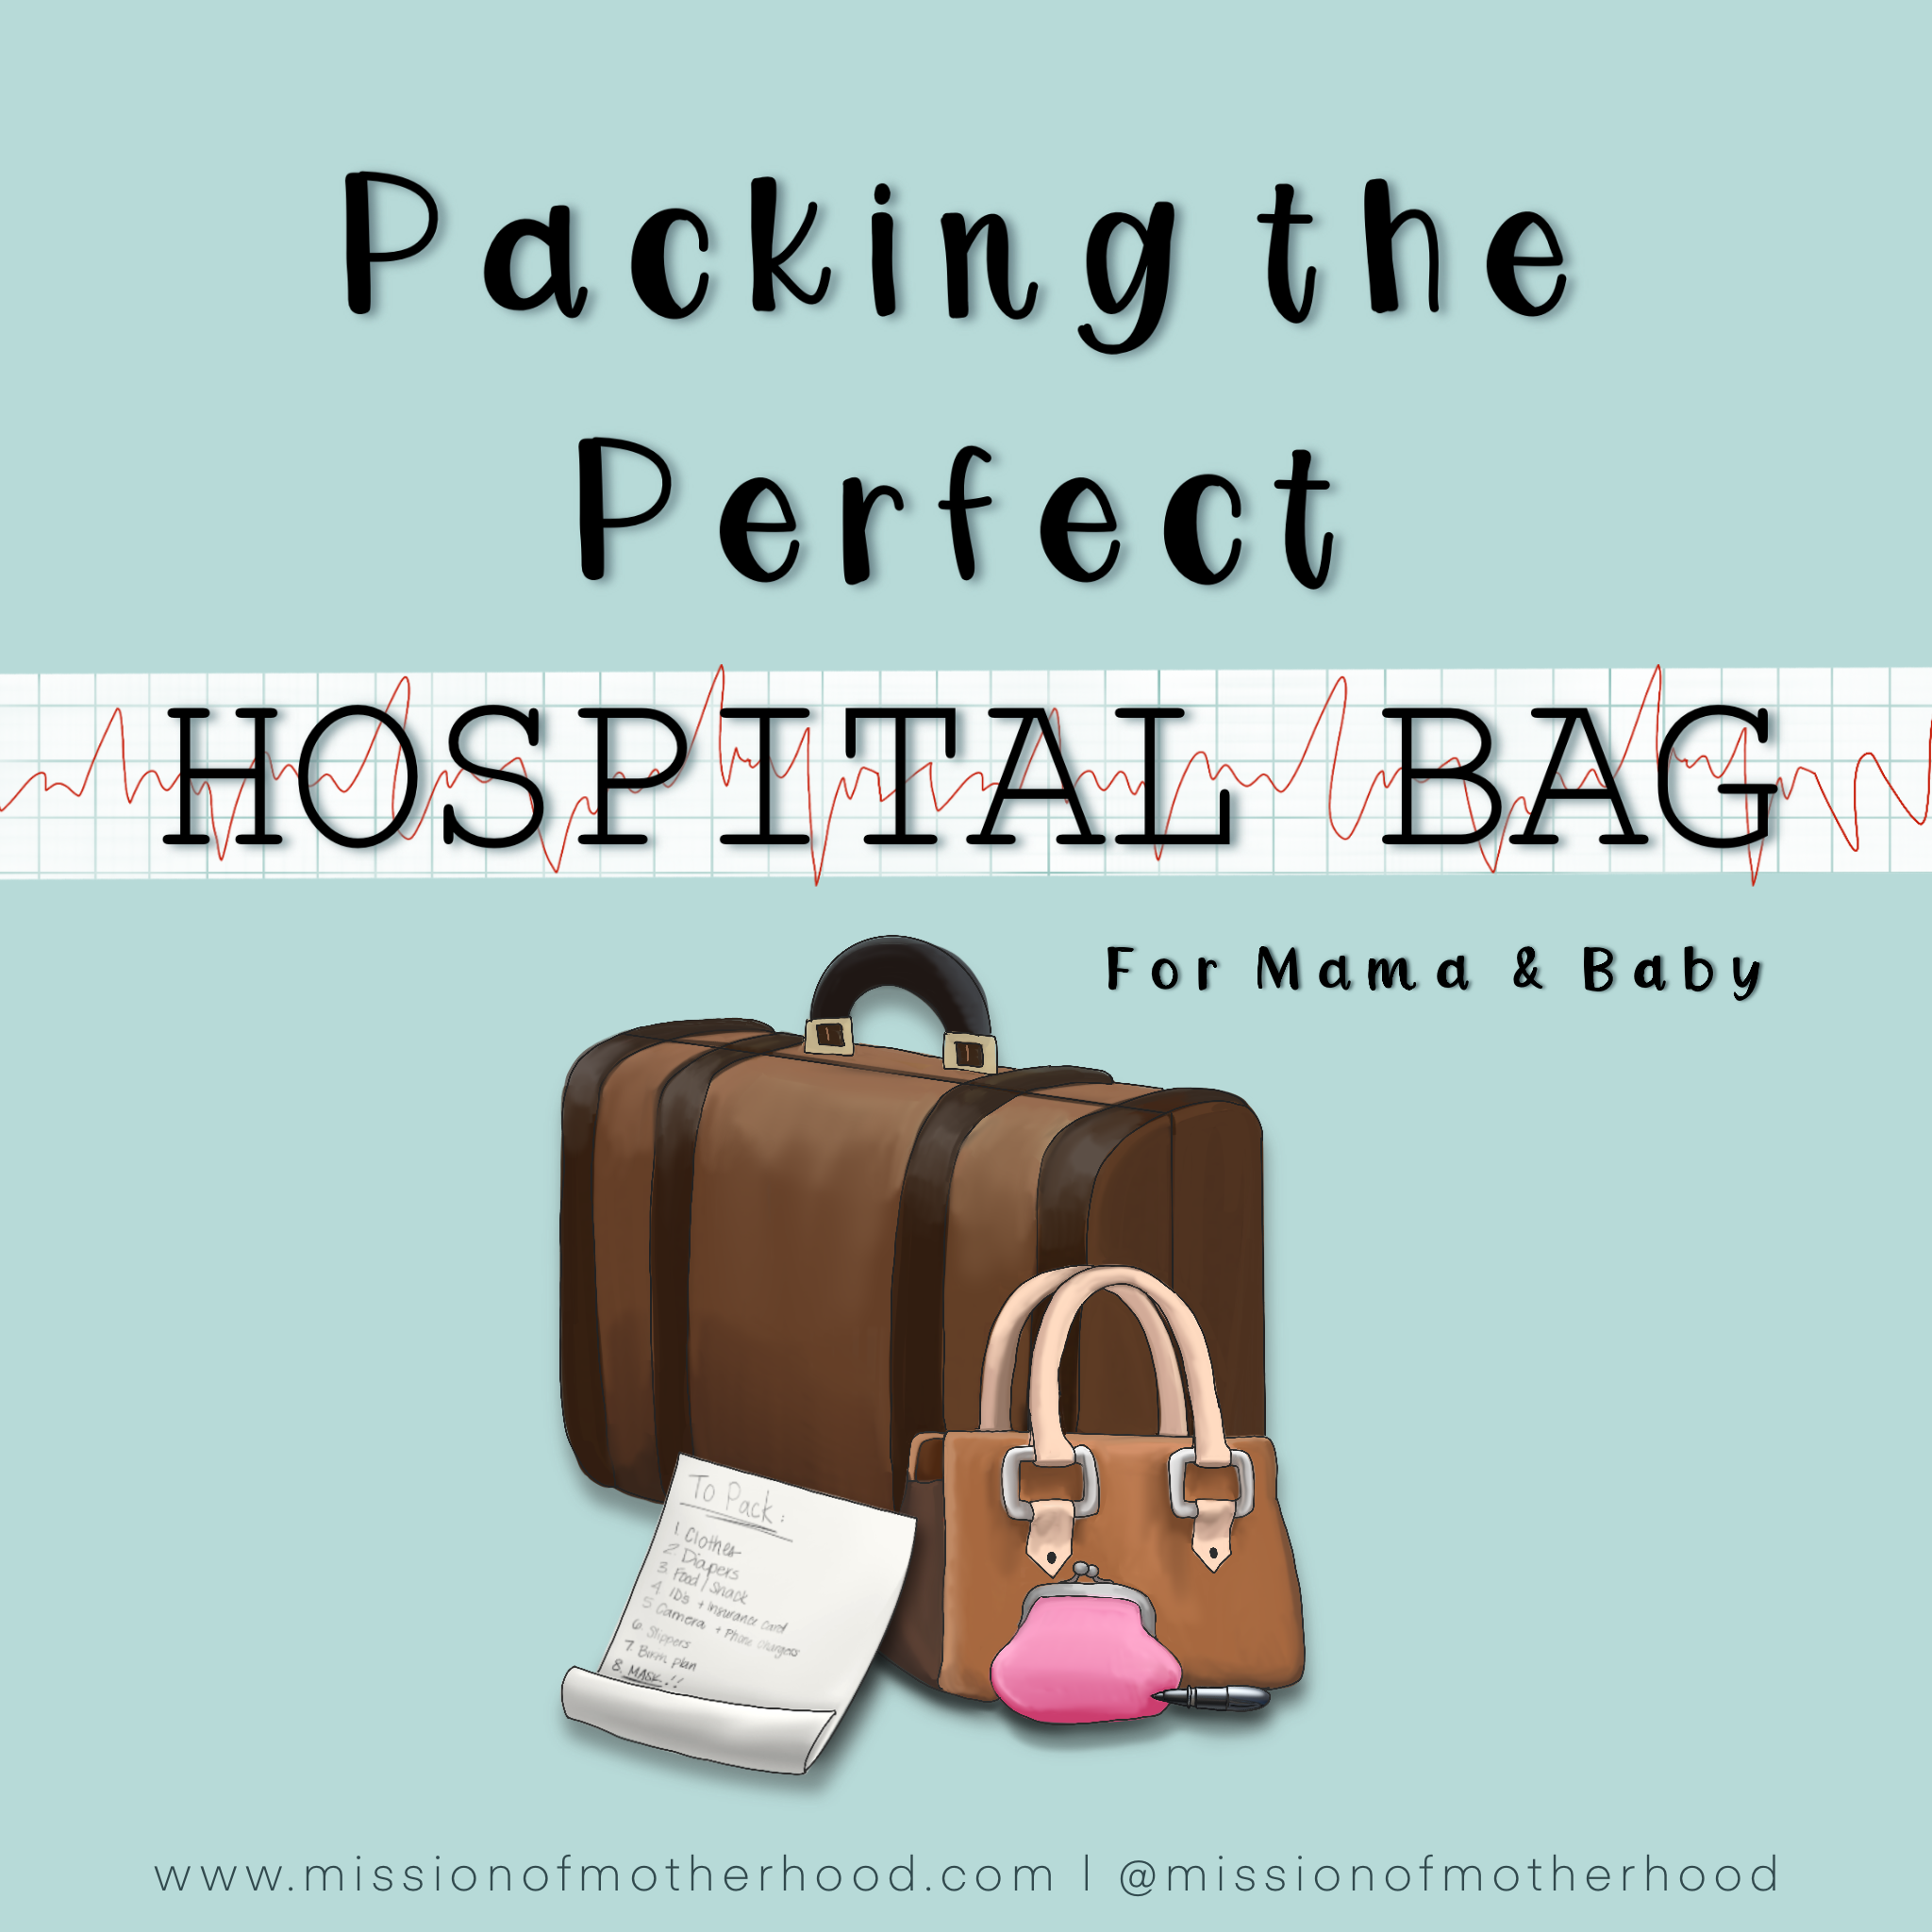 Pack the hospital bag | H&M Baby